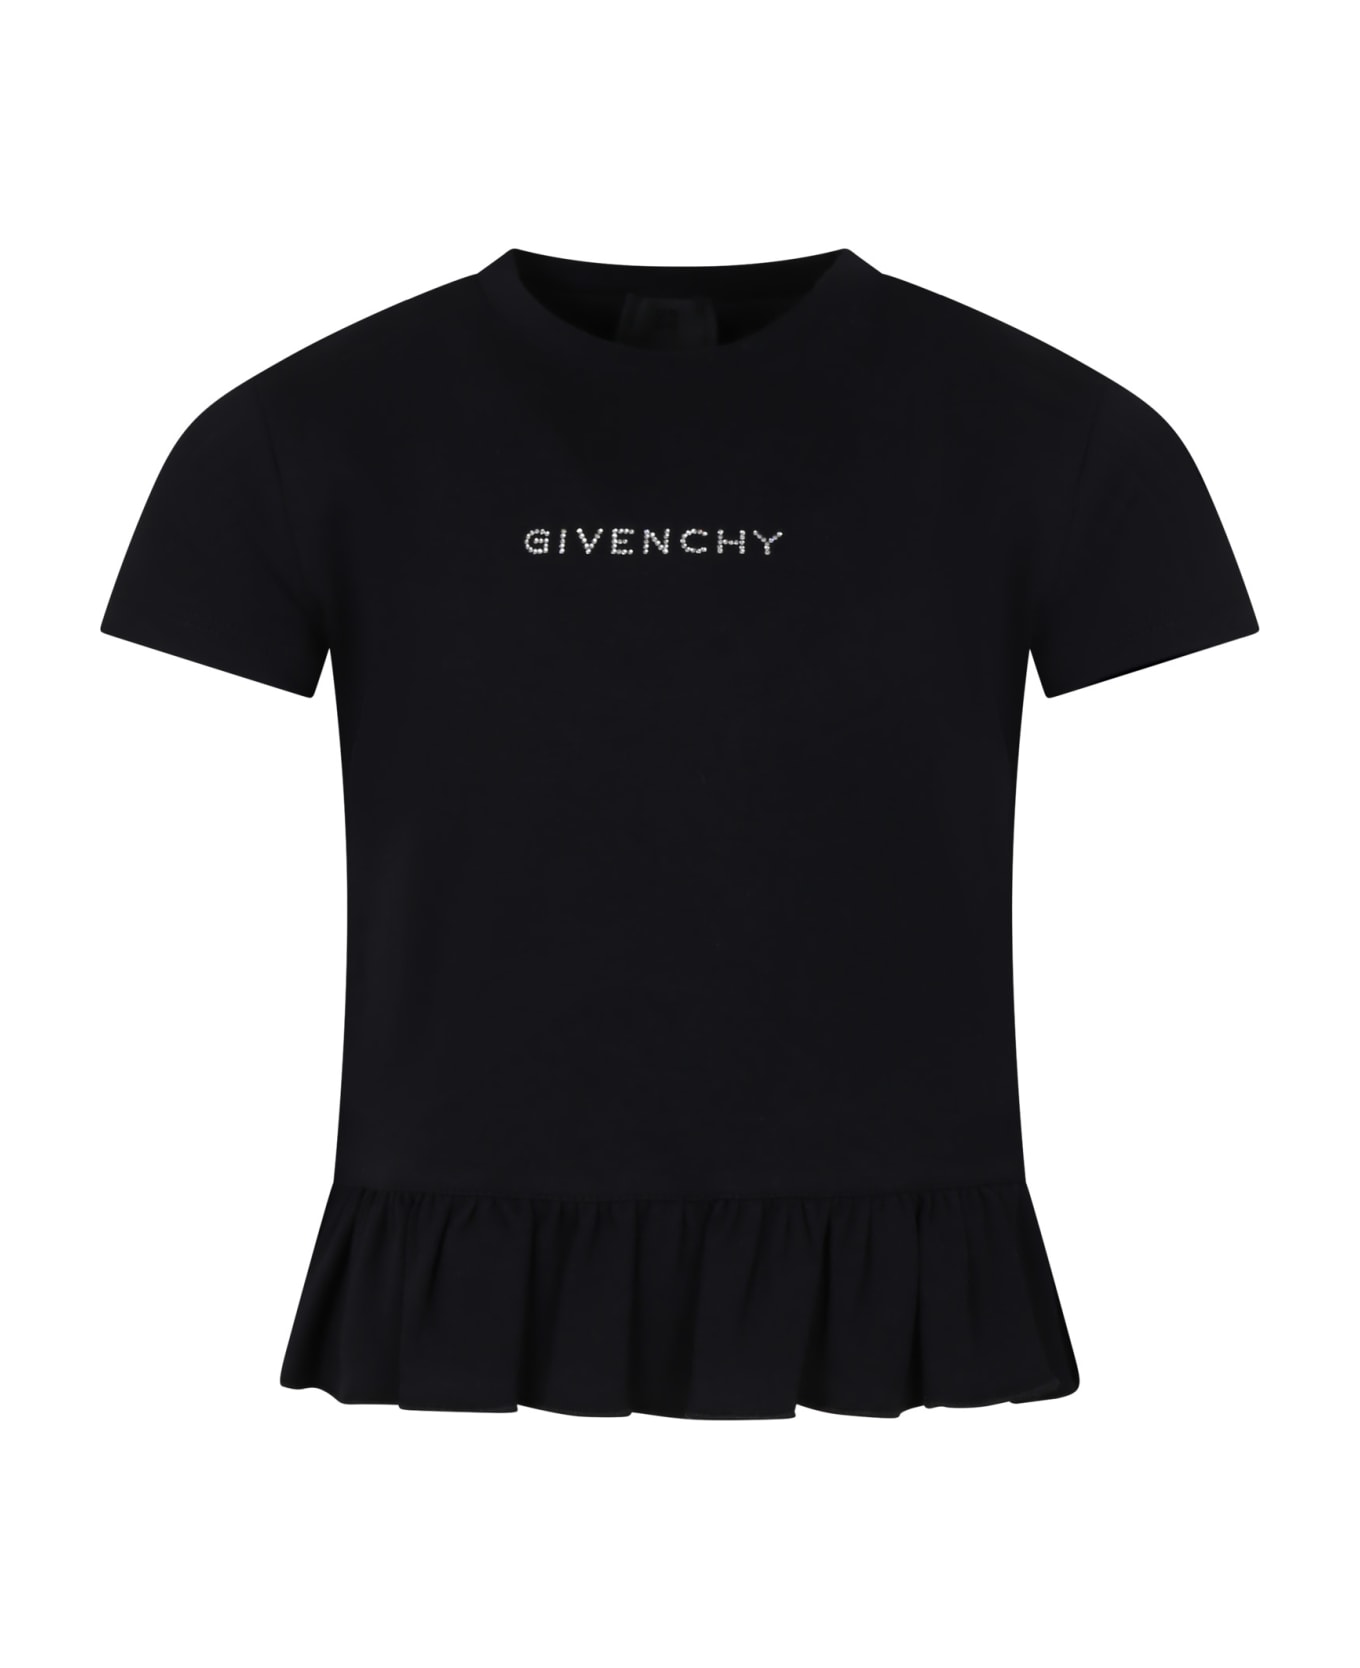 Givenchy Black T-shirt For Girl With Logo - Black